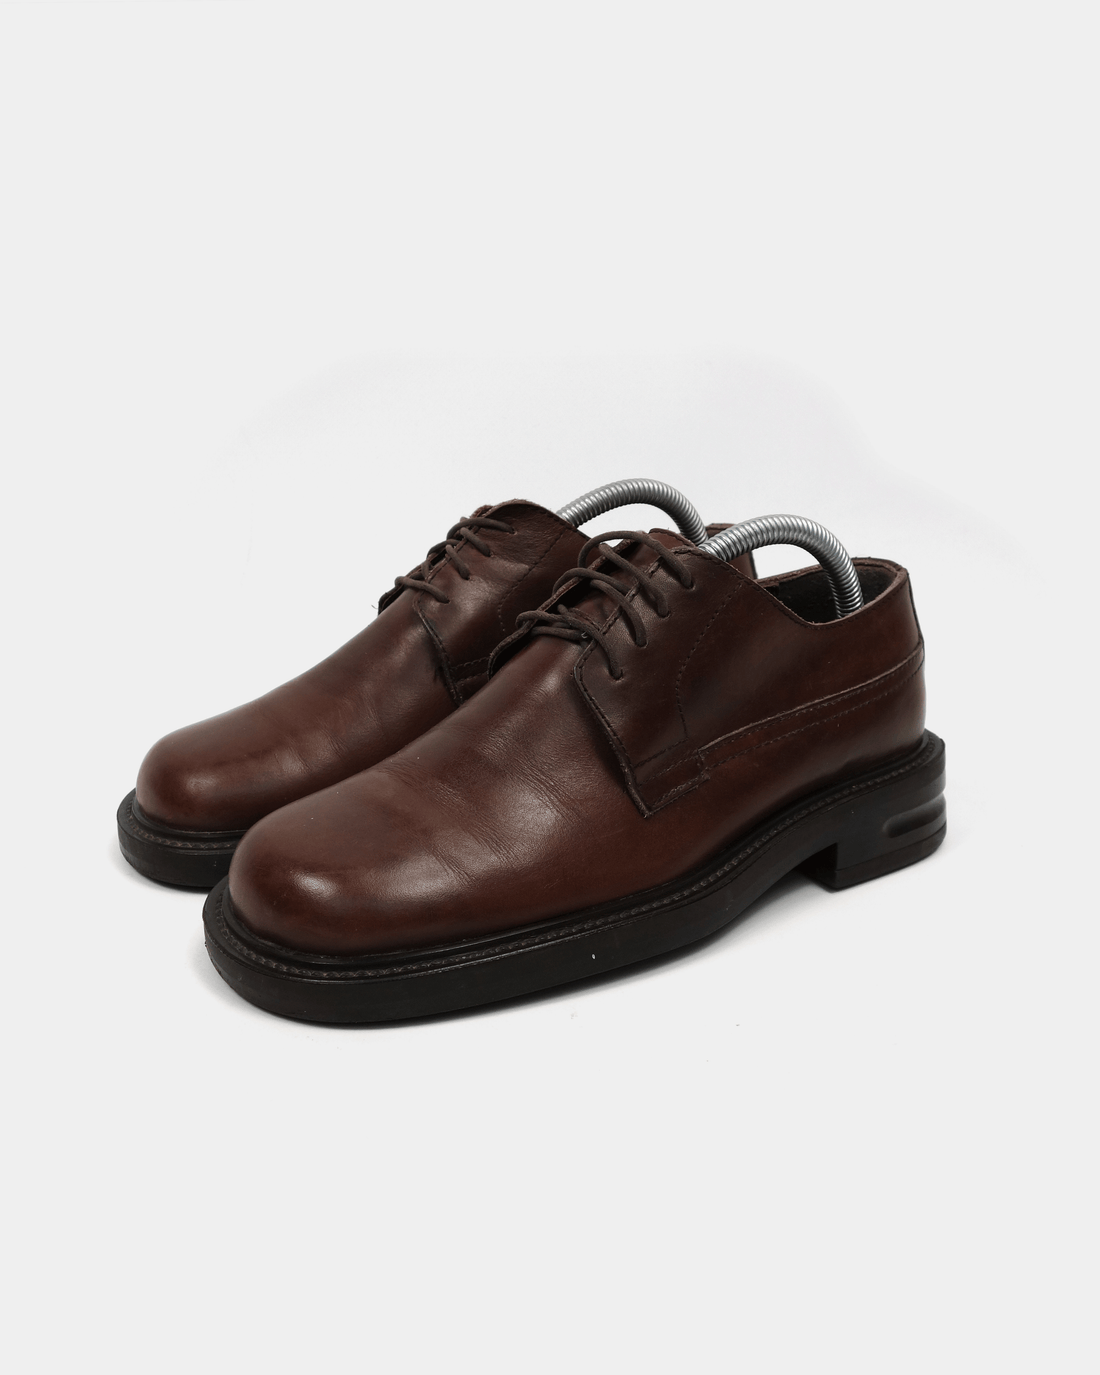 Kenzo Homme Brown Leather Derby Shoes 1990's